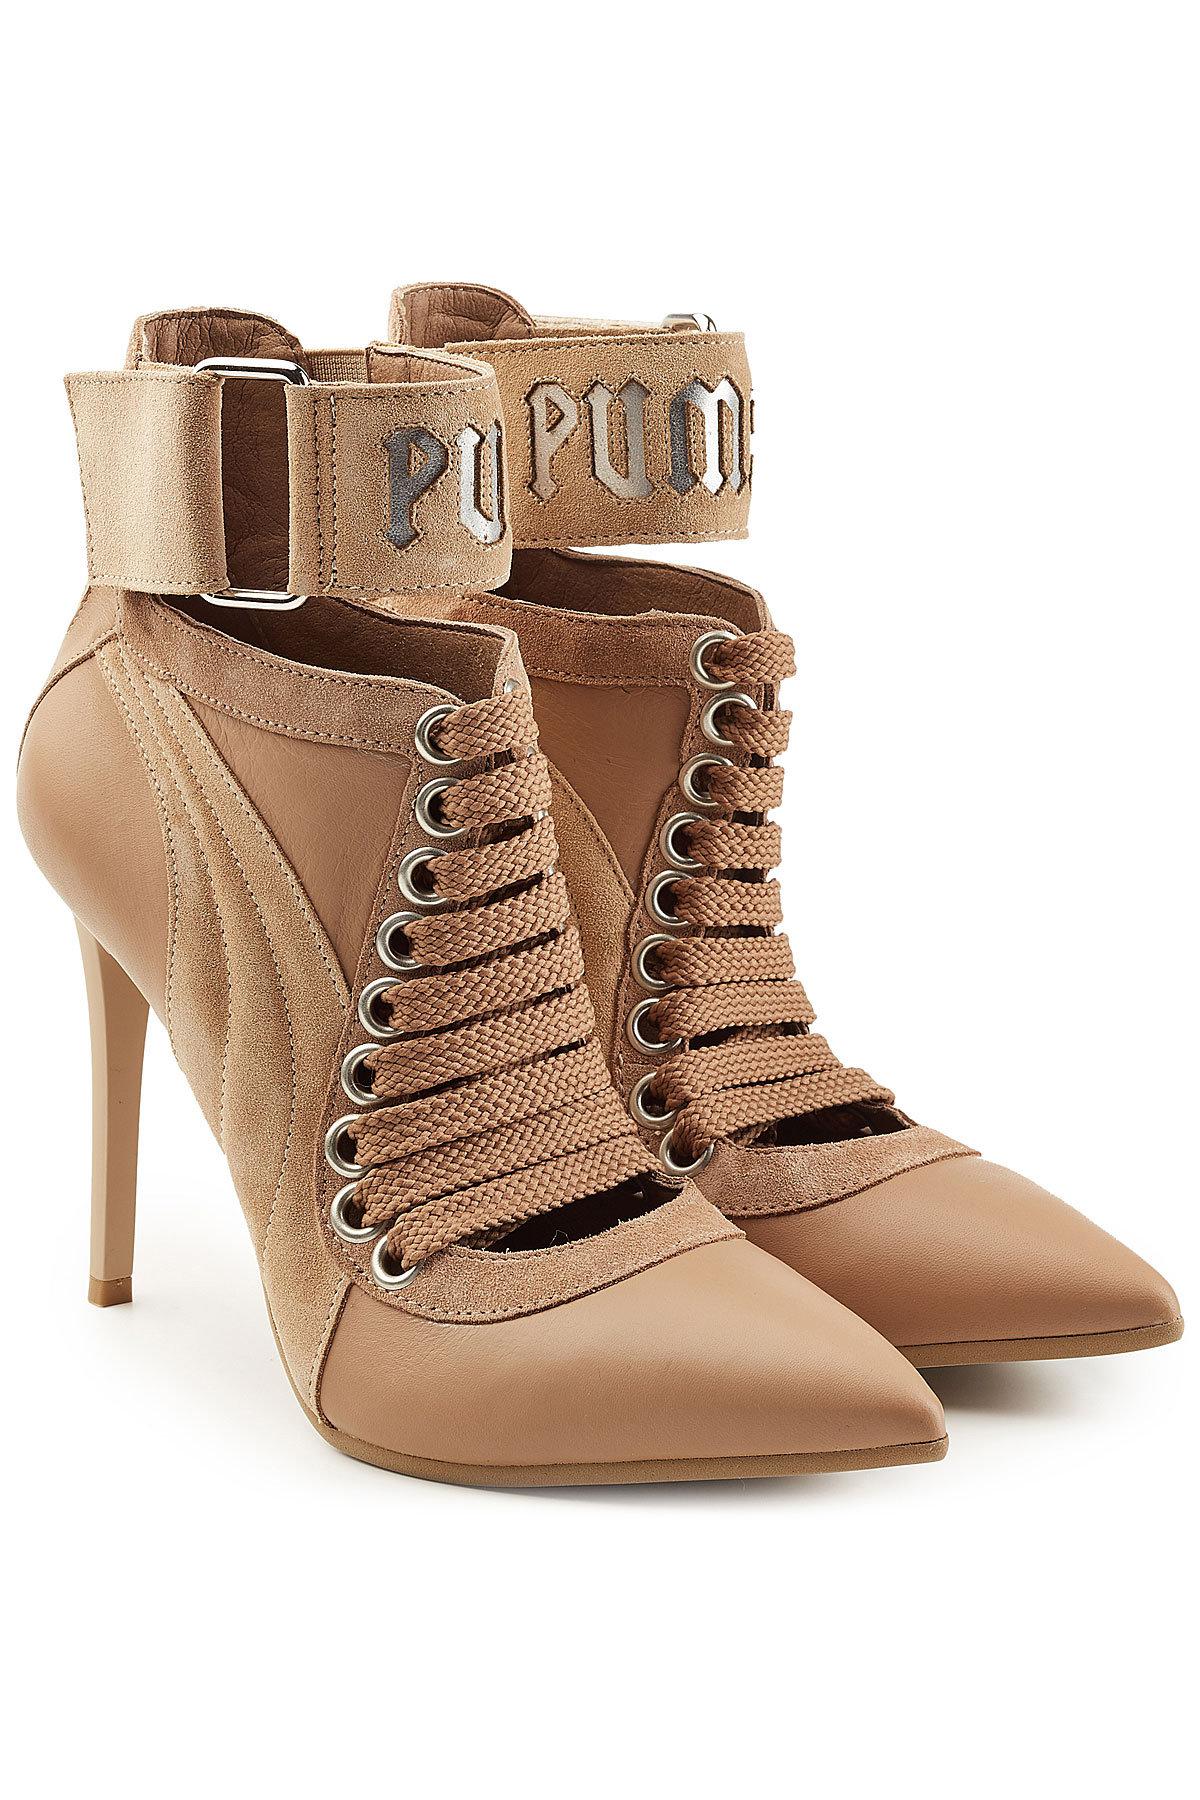 Lyst - Puma Lace Up Stiletto Boots With Leather And Suede in Brown